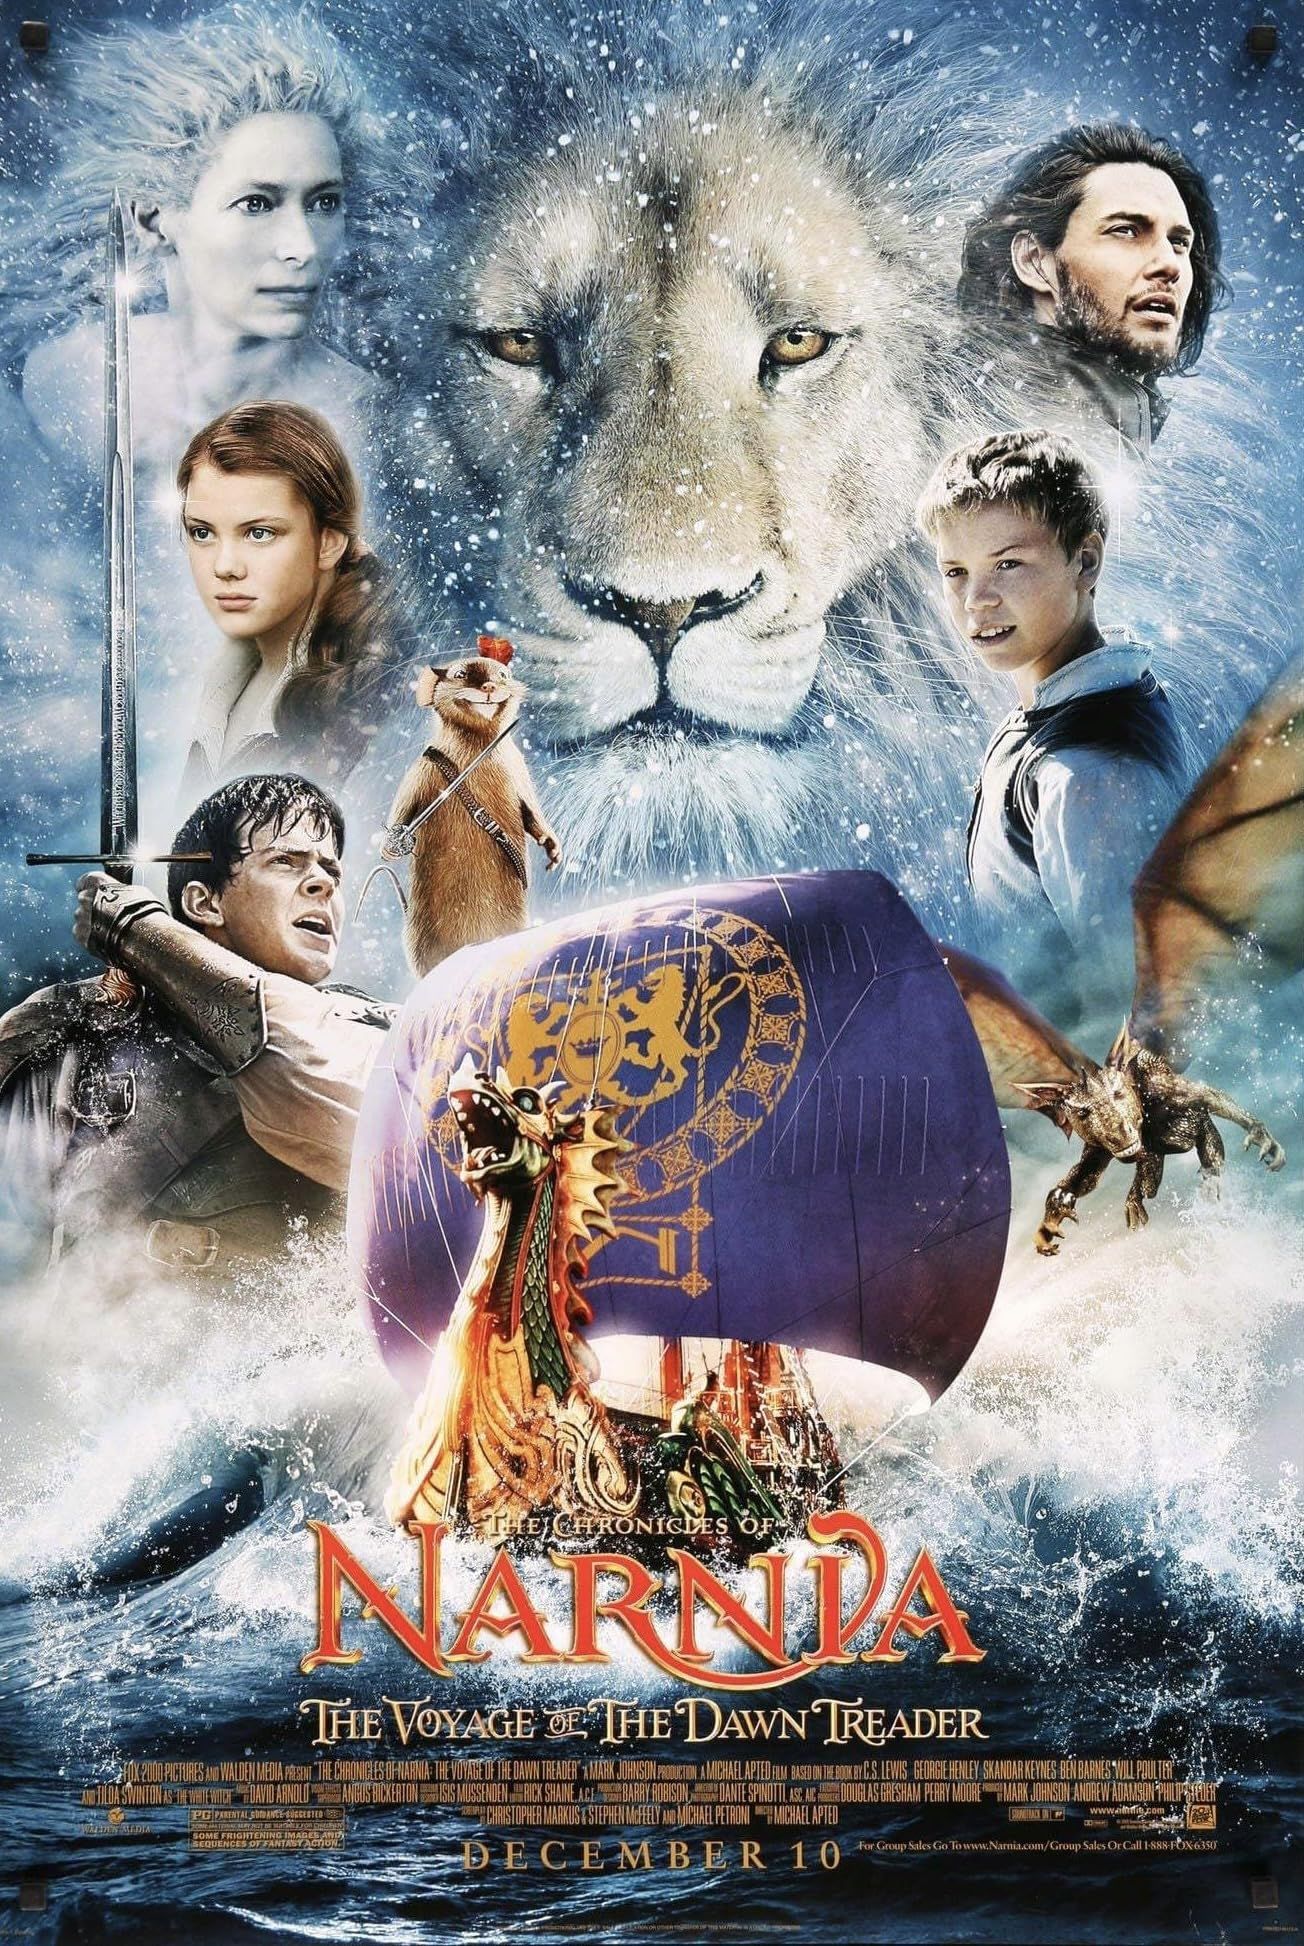 The Chronicles of Narnia The Voyage of the Dawn Treader 2010 Hindi Dubbed Movie download full movie